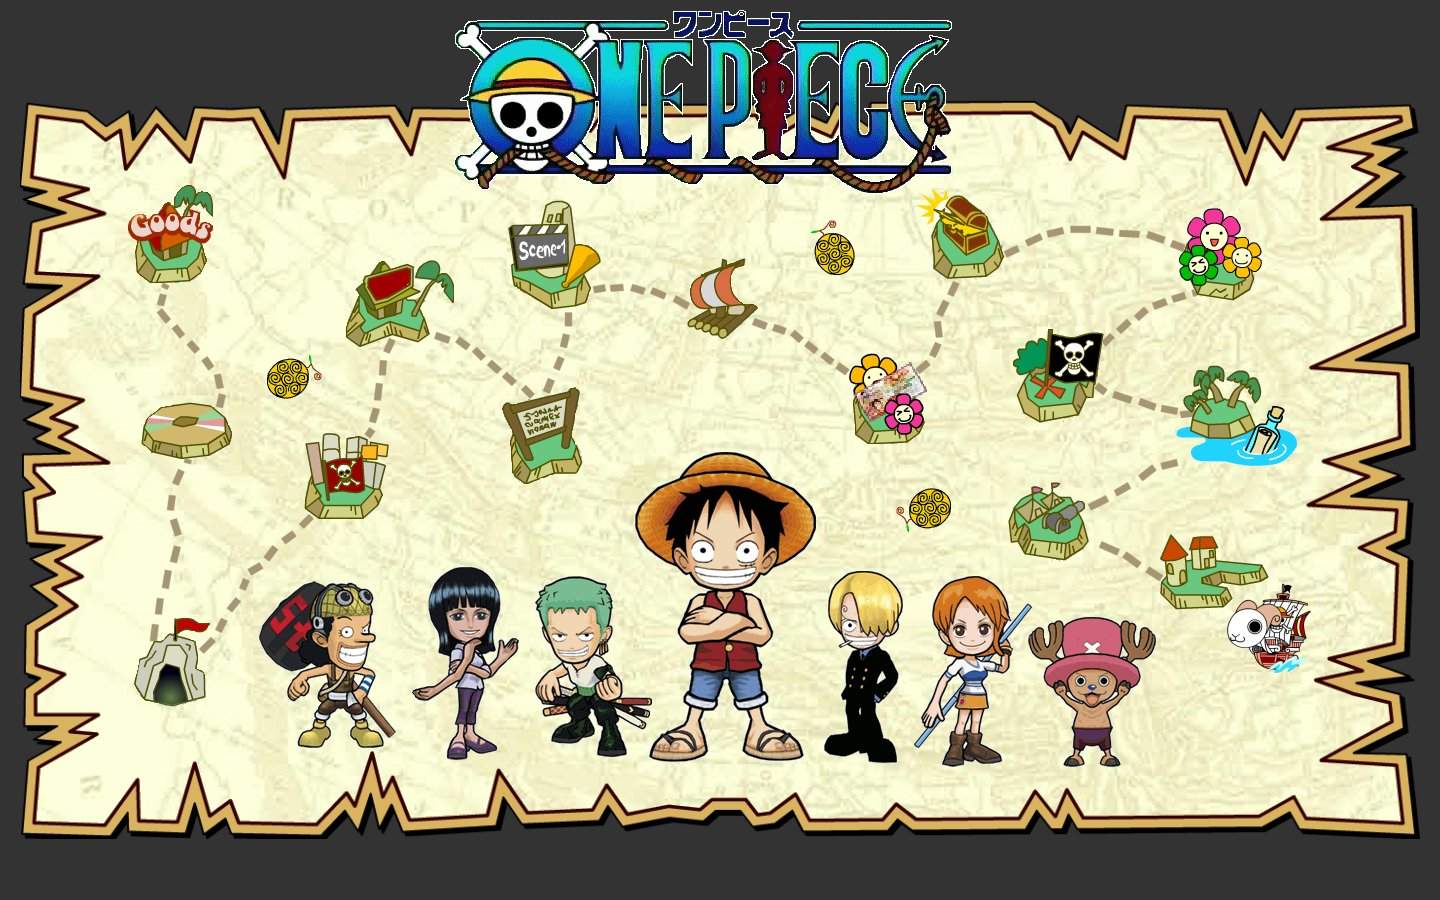 One Piece Chibi HD Image. Download High Quality Resolution